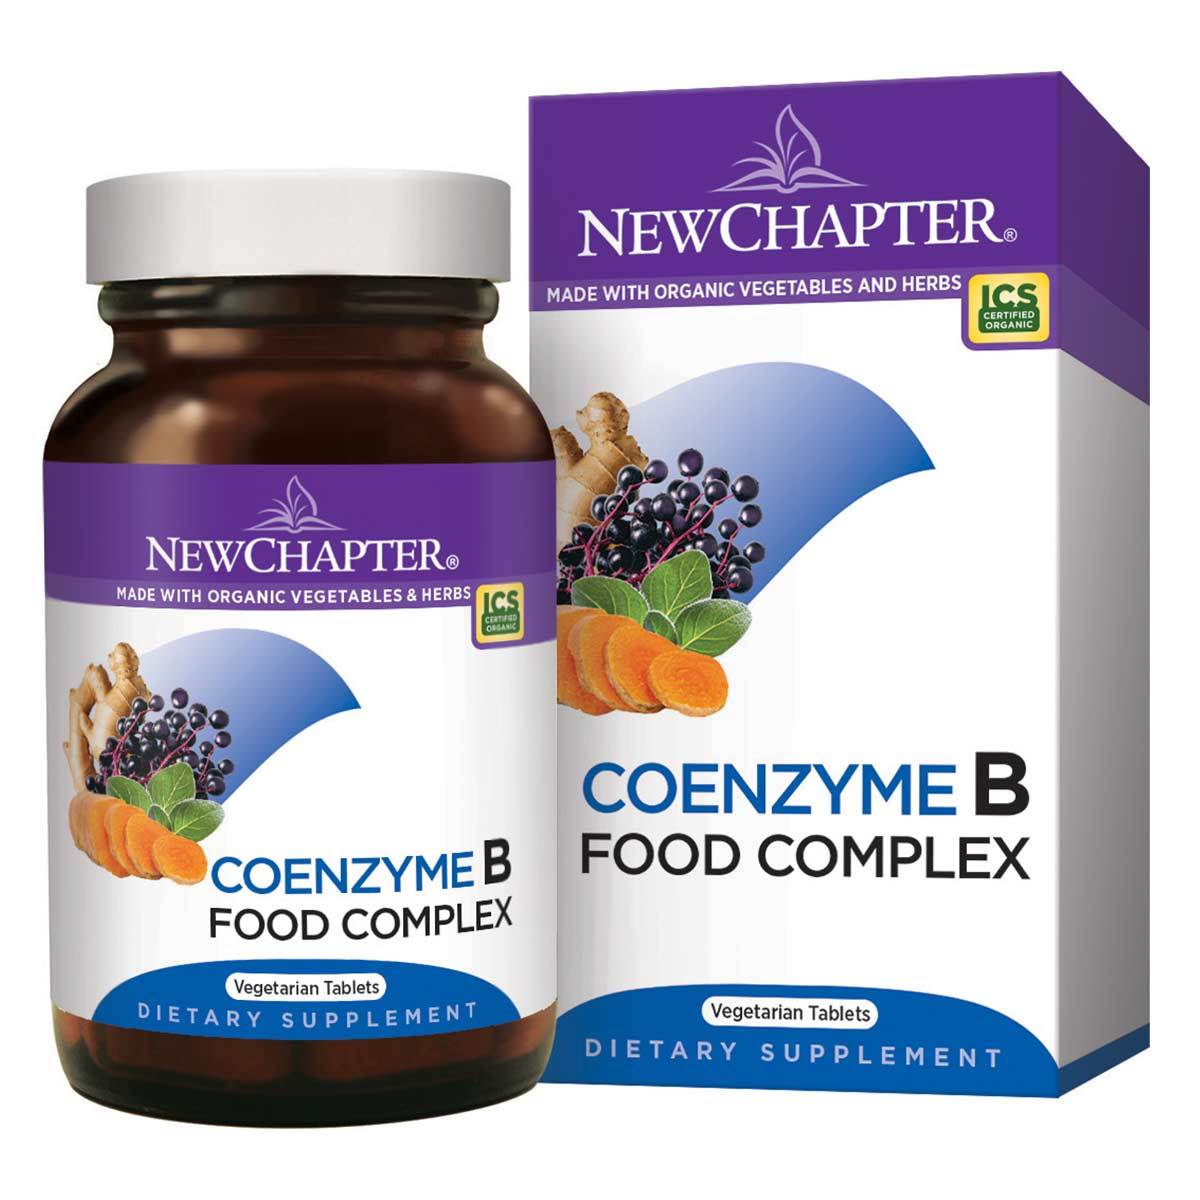 Primary image of Coenzyme B Food Complex